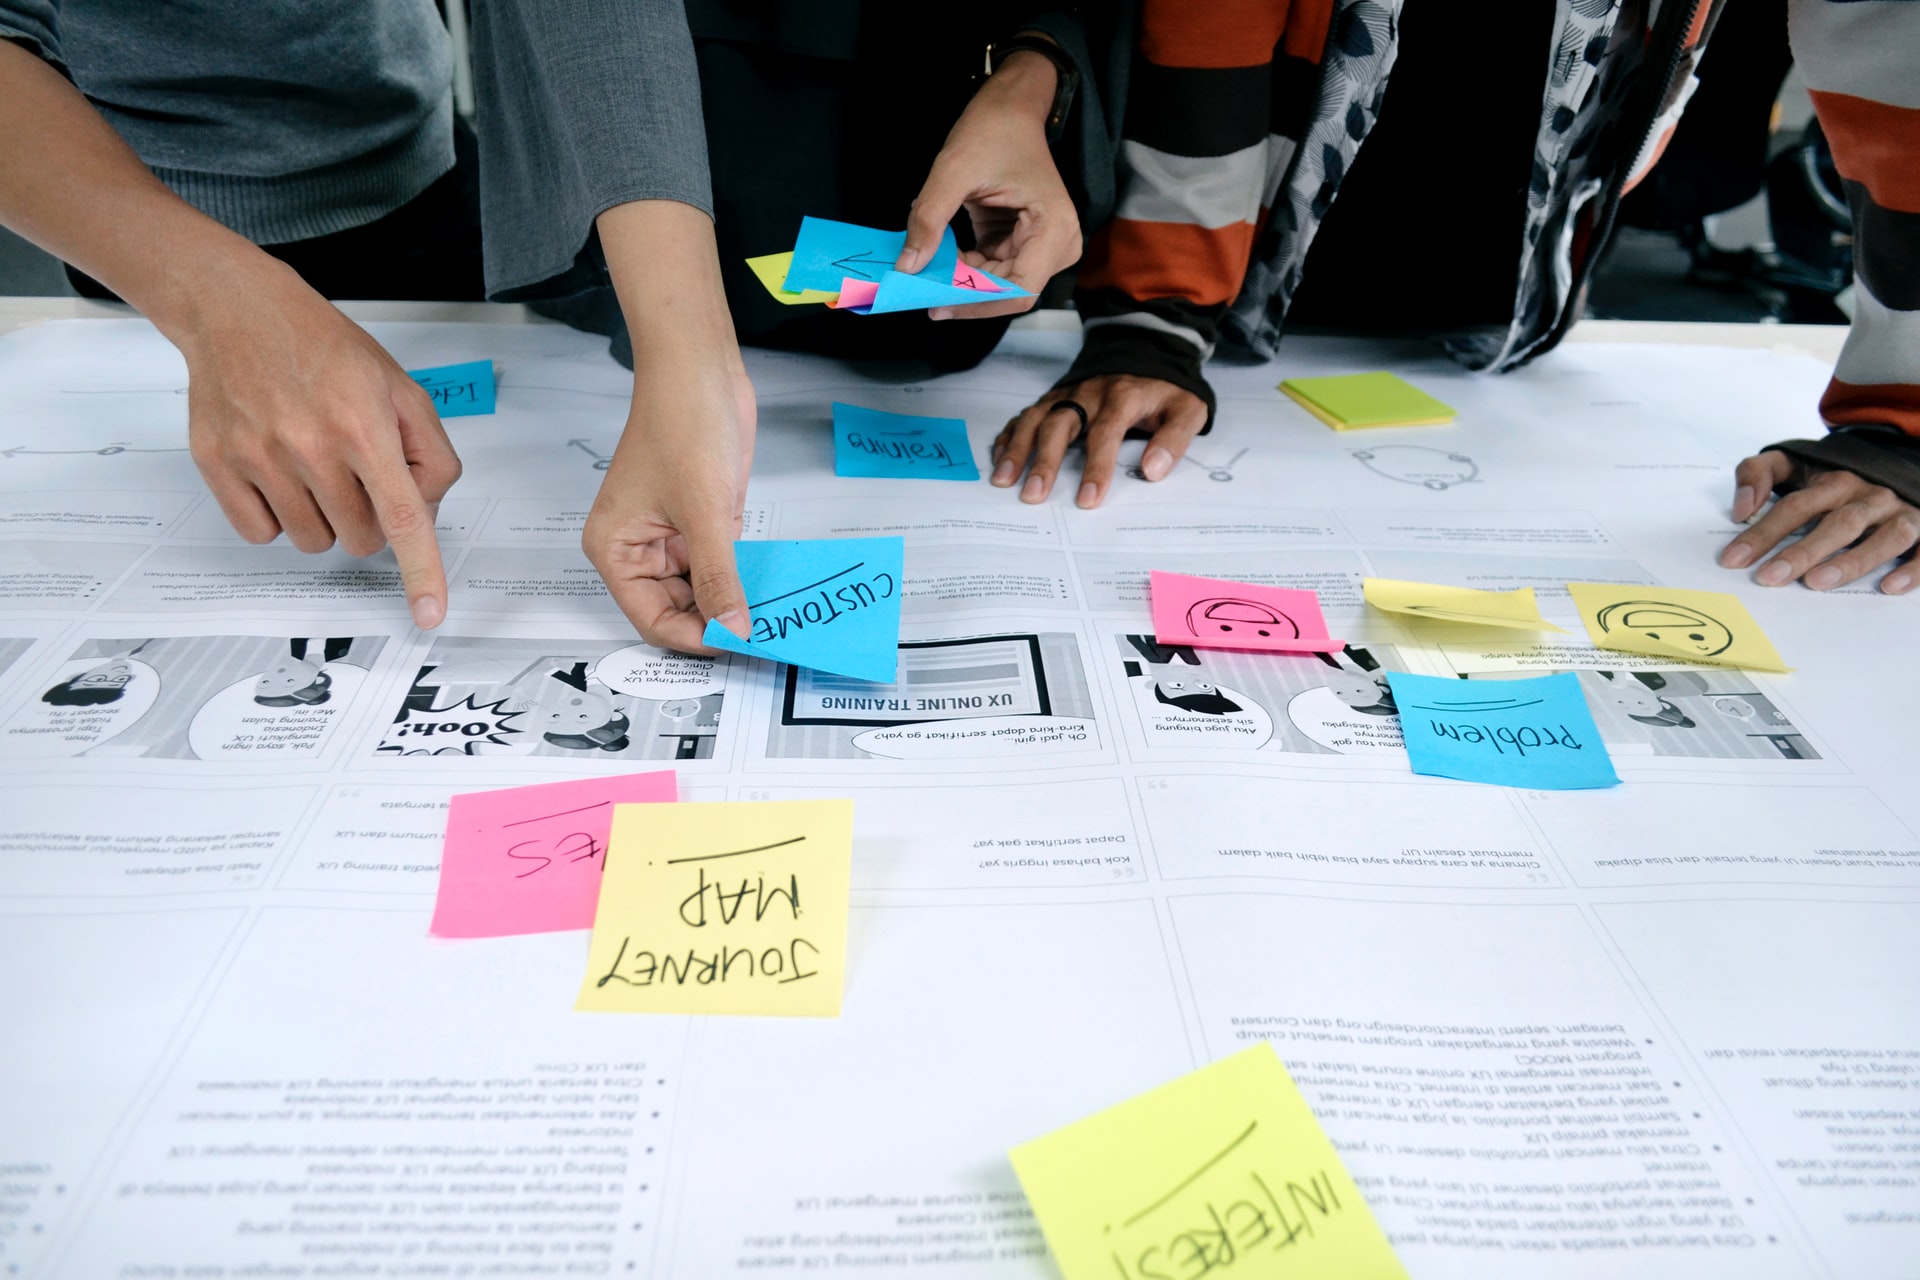 Journey mapping workshop for user experience